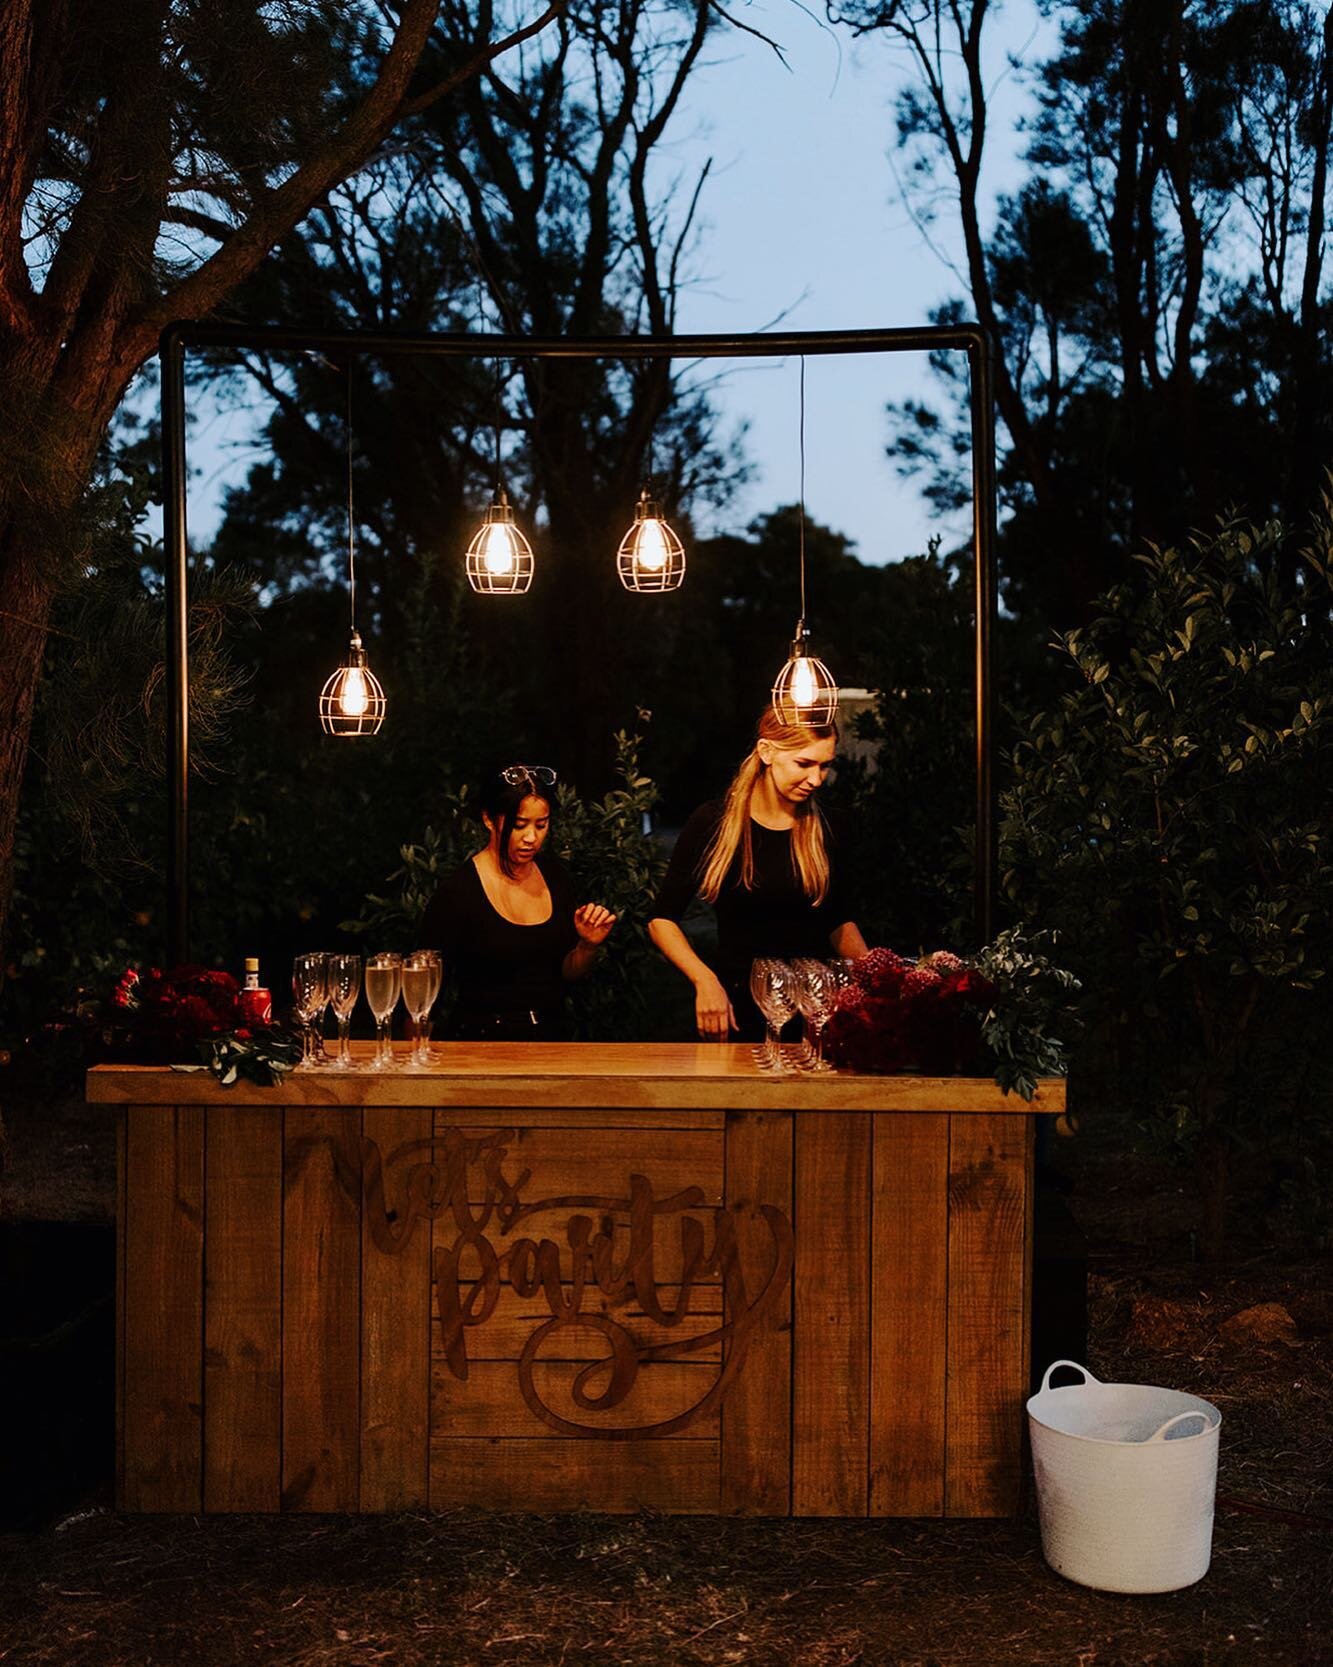 We don't know about you, but we're starting to miss the summer nights under the stars with cocktails and beer
.
.
.
.
#perthfurniturehire #perthpopupbar